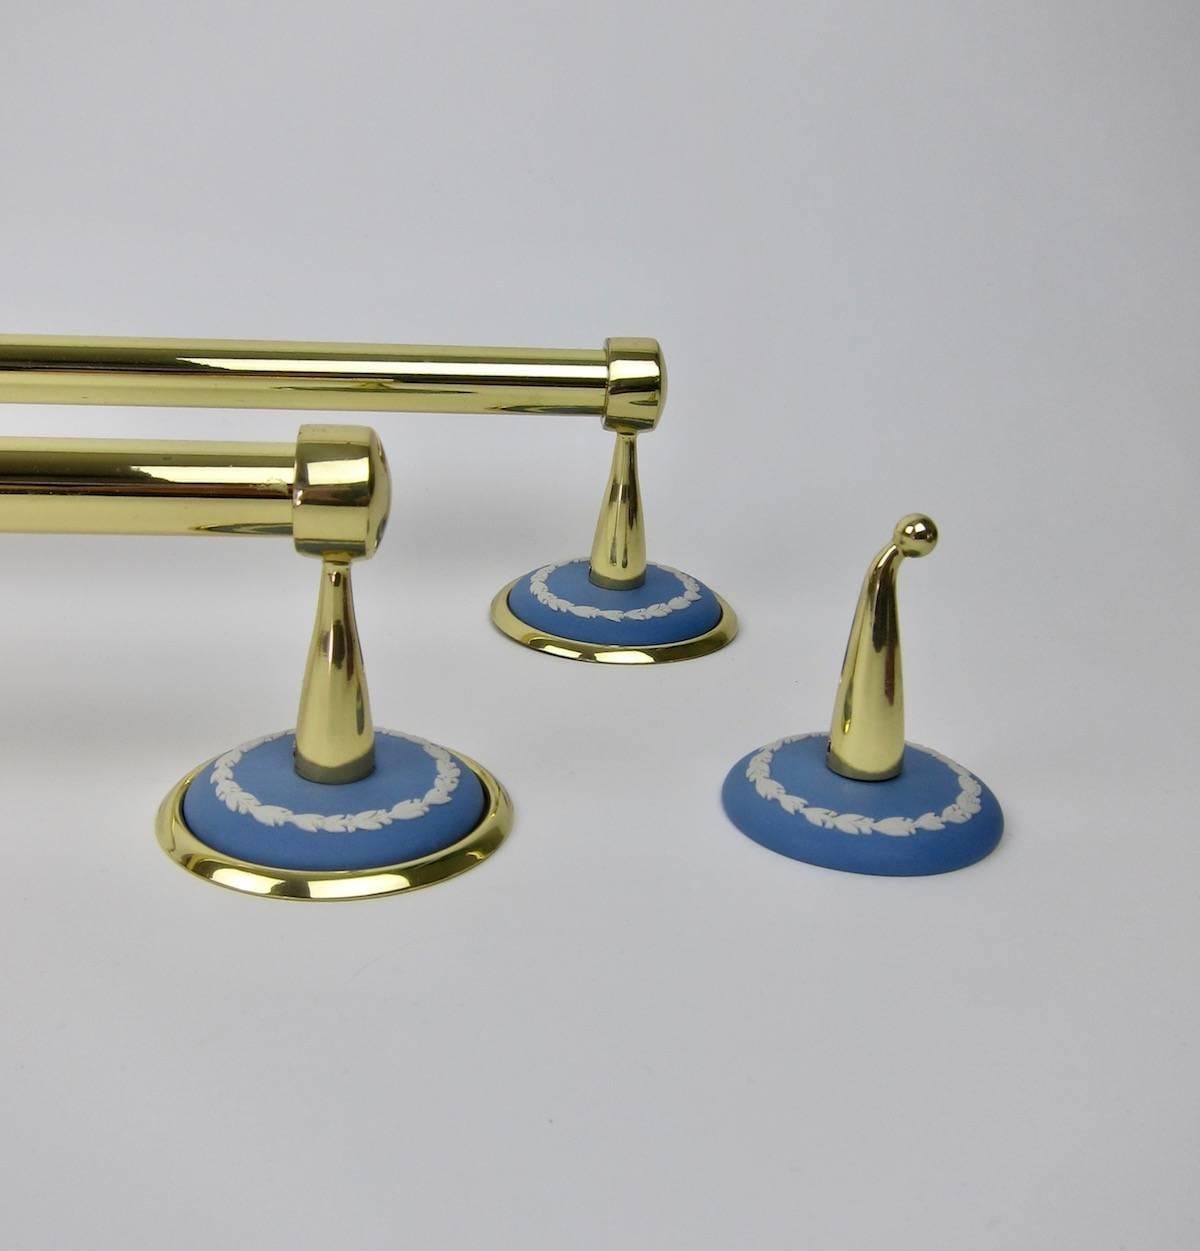 20th Century Vintage Set of Wedgwood Bathroom Accessories with Jasper Ware Accents